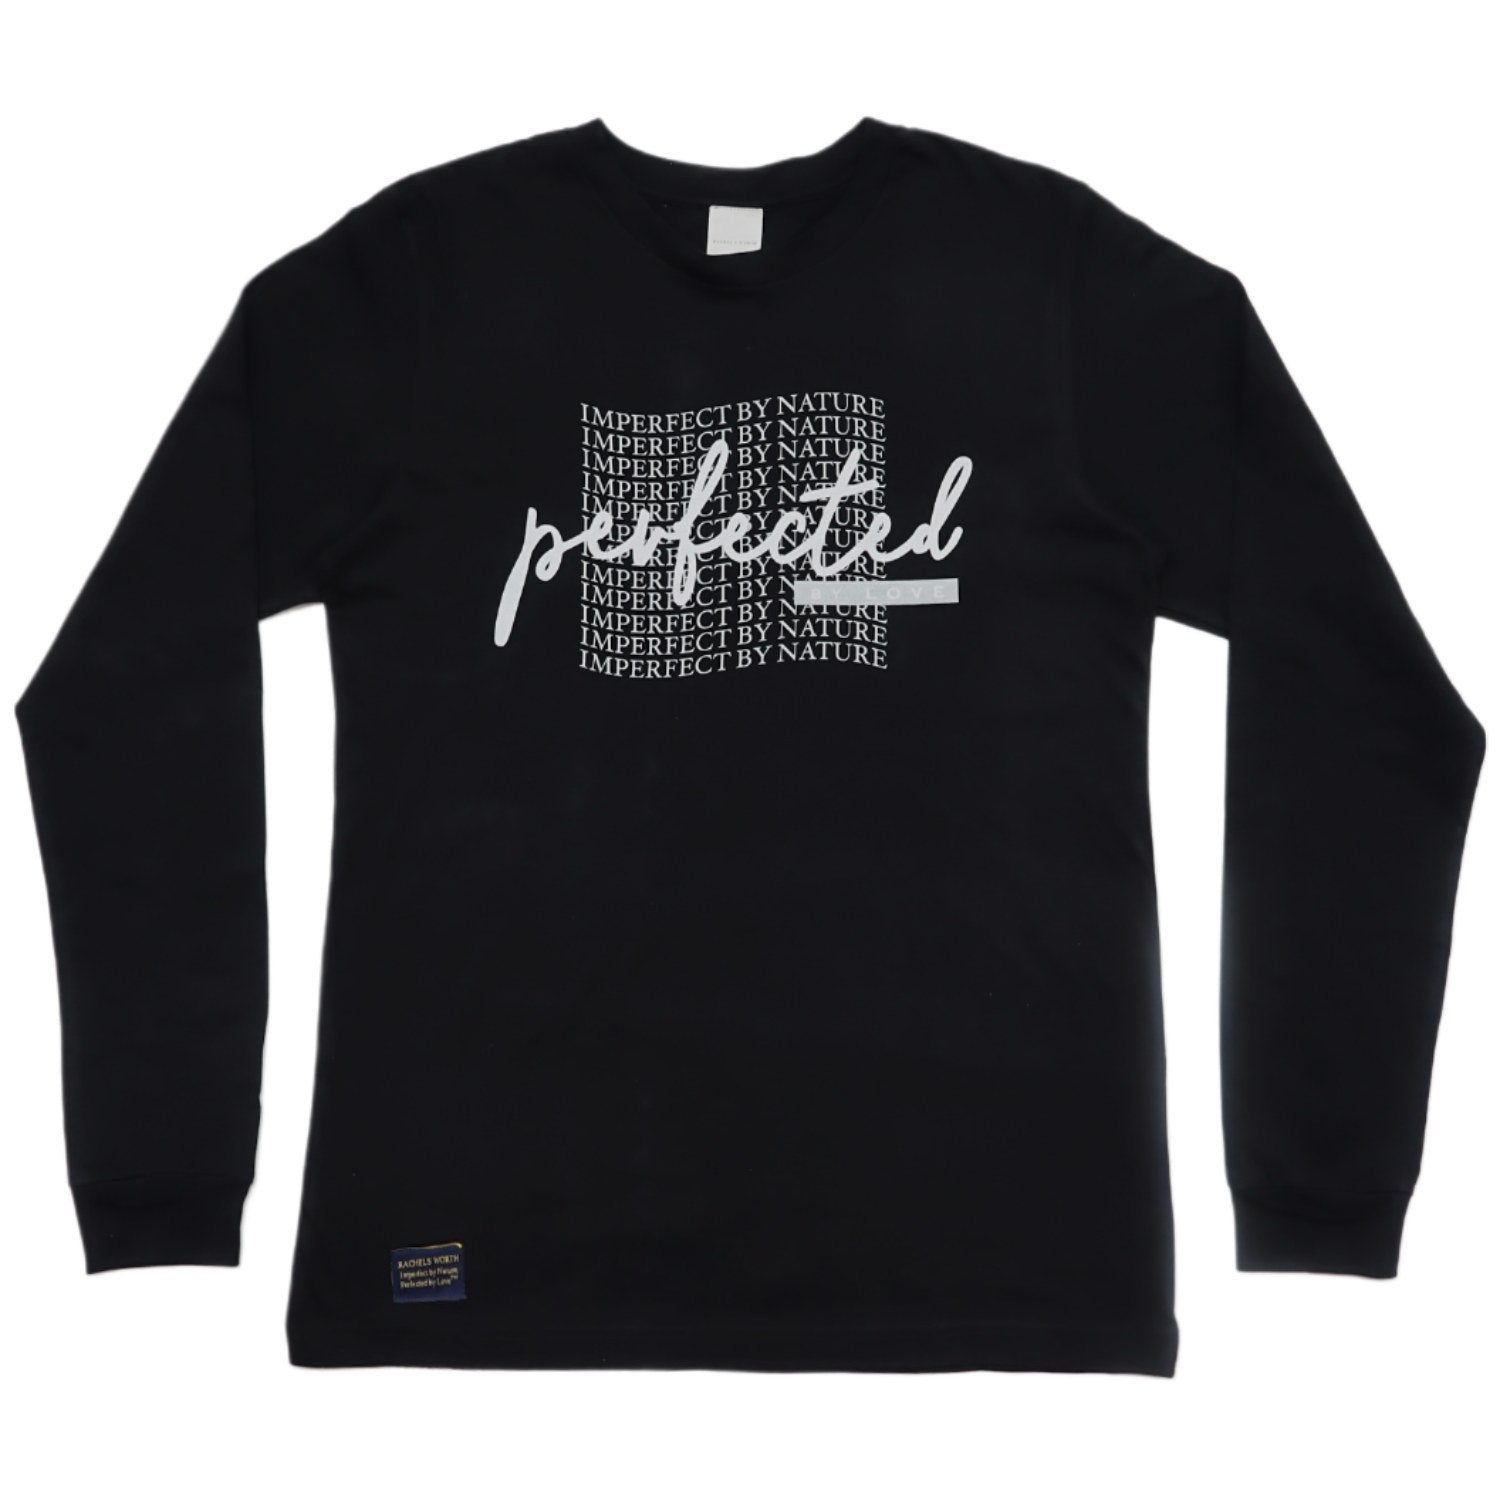 Perfected by Love Wave Black Long Sleeve Shirt